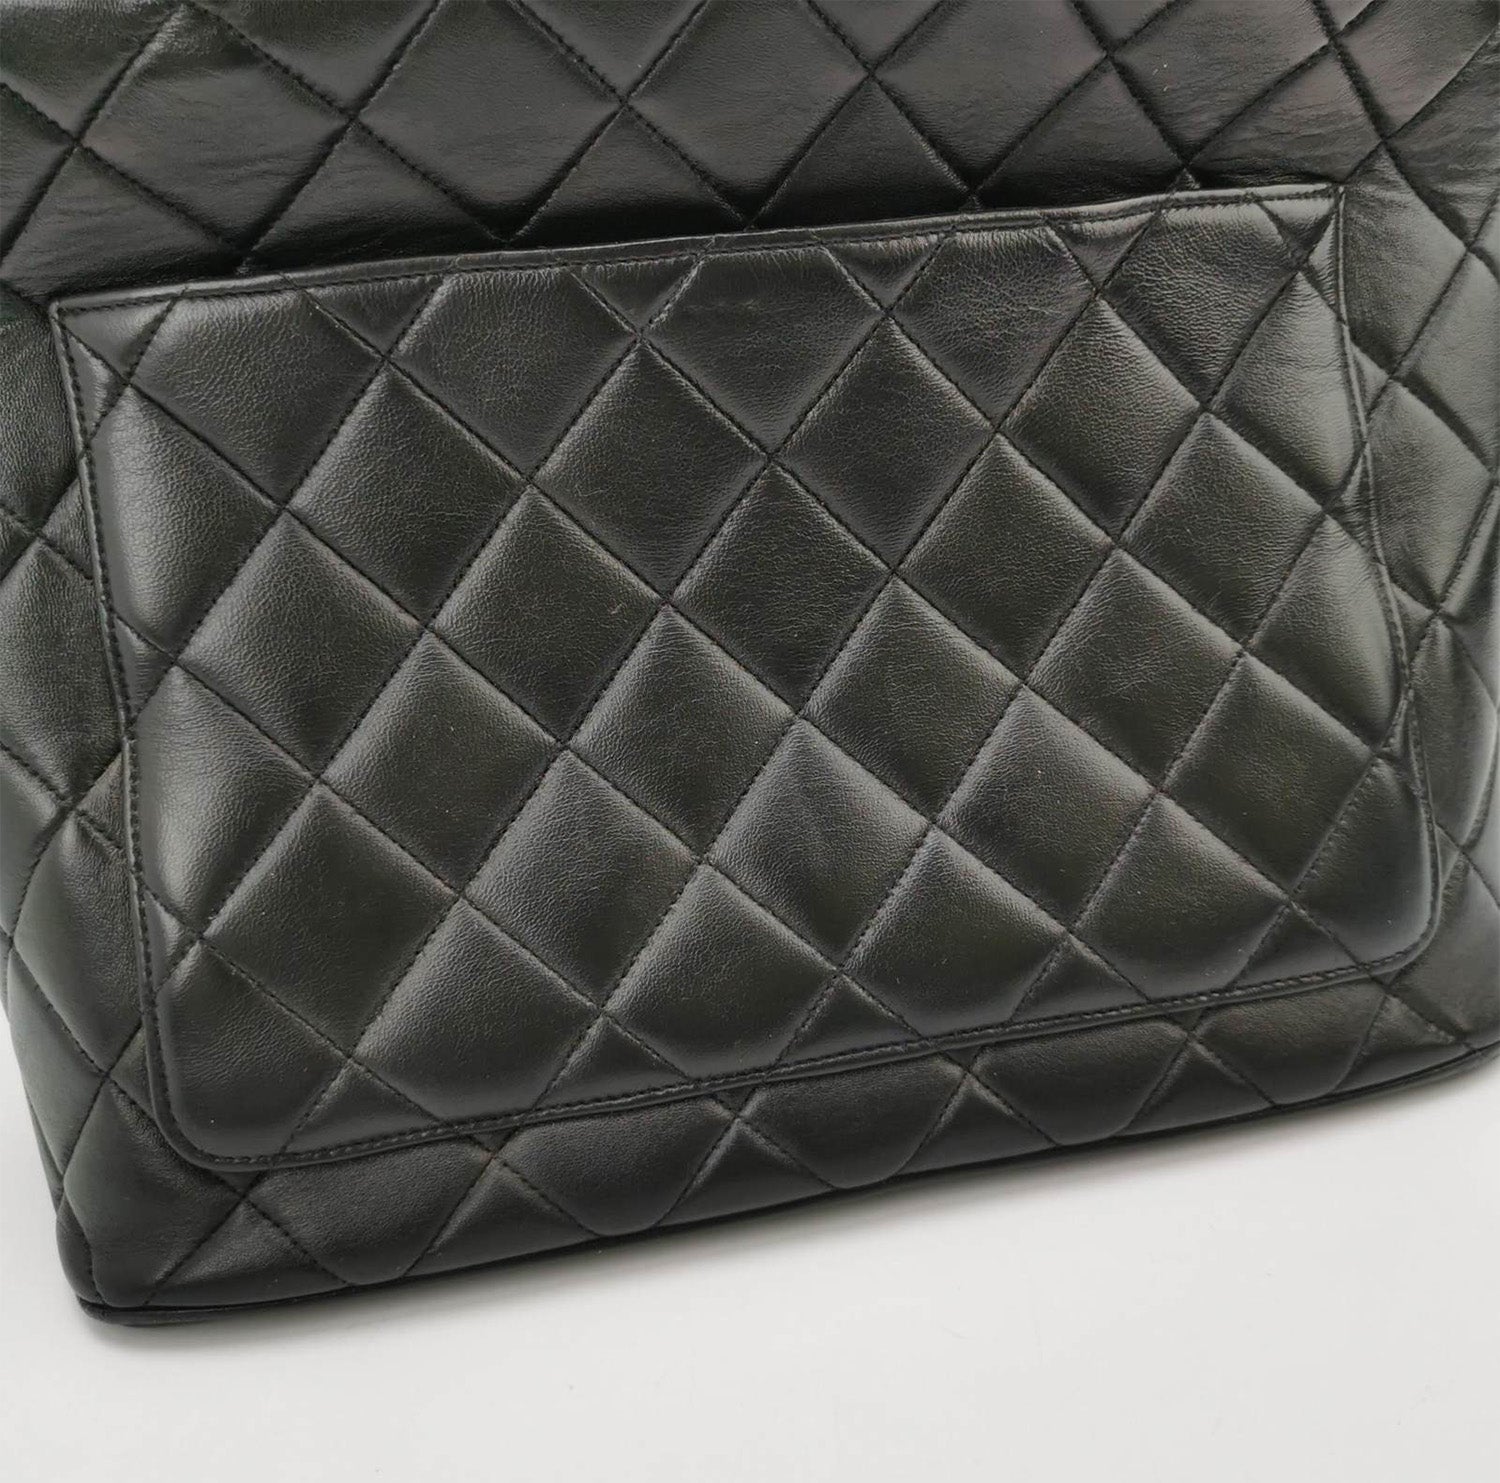 chanel vintage black lambskin leather quilted tote bag